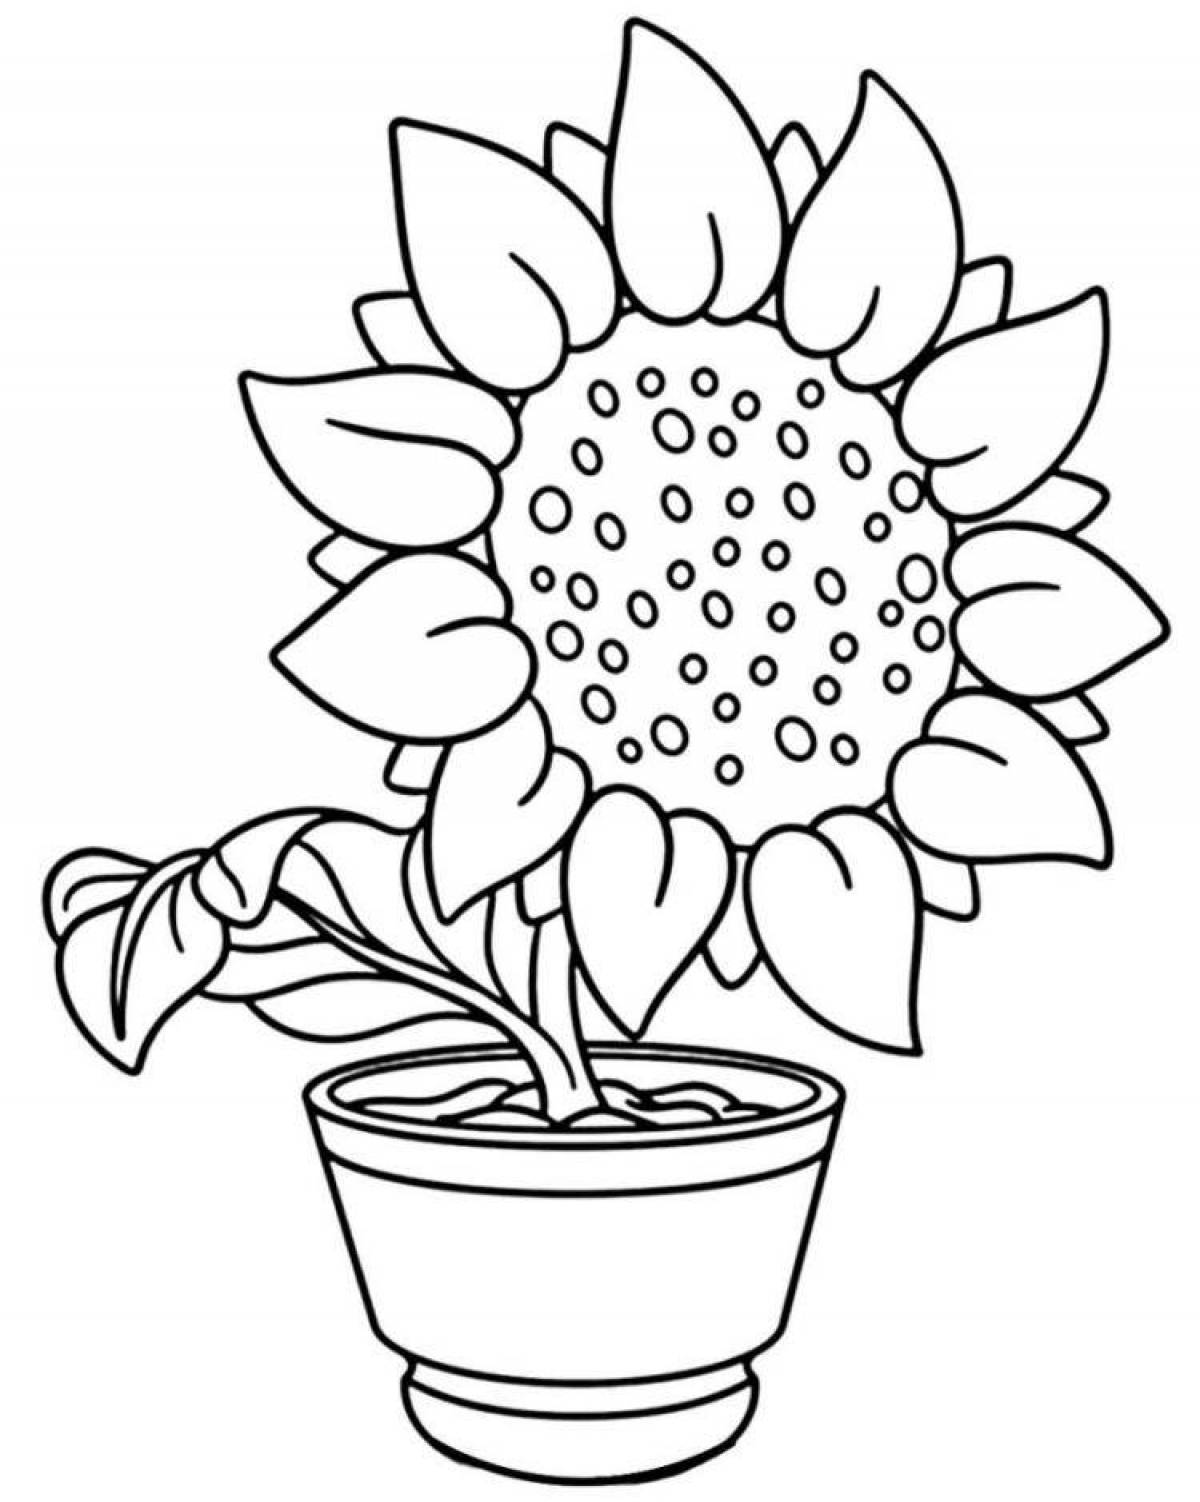 Great sunflower coloring book for kids